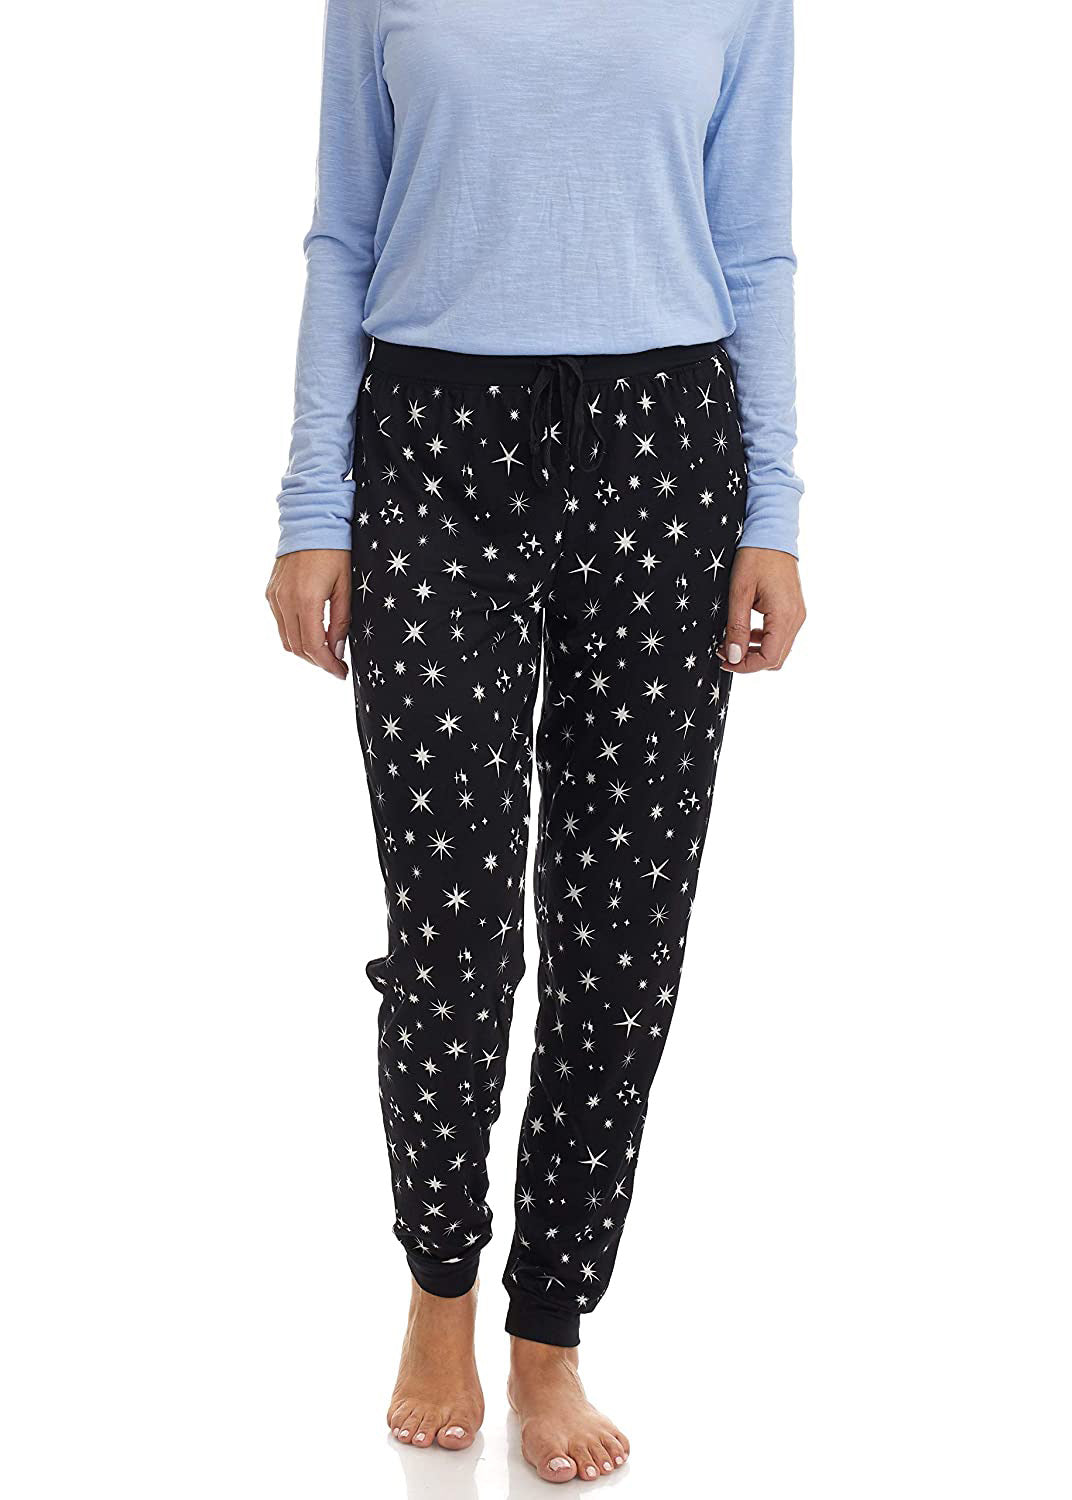 PJ joggers with soft velvety texture, stretch, elastic waistband, drawstring, and stylish ankle cuff. This pattern is scattered stars, of varied size and shape, white, on black stars on a black background.